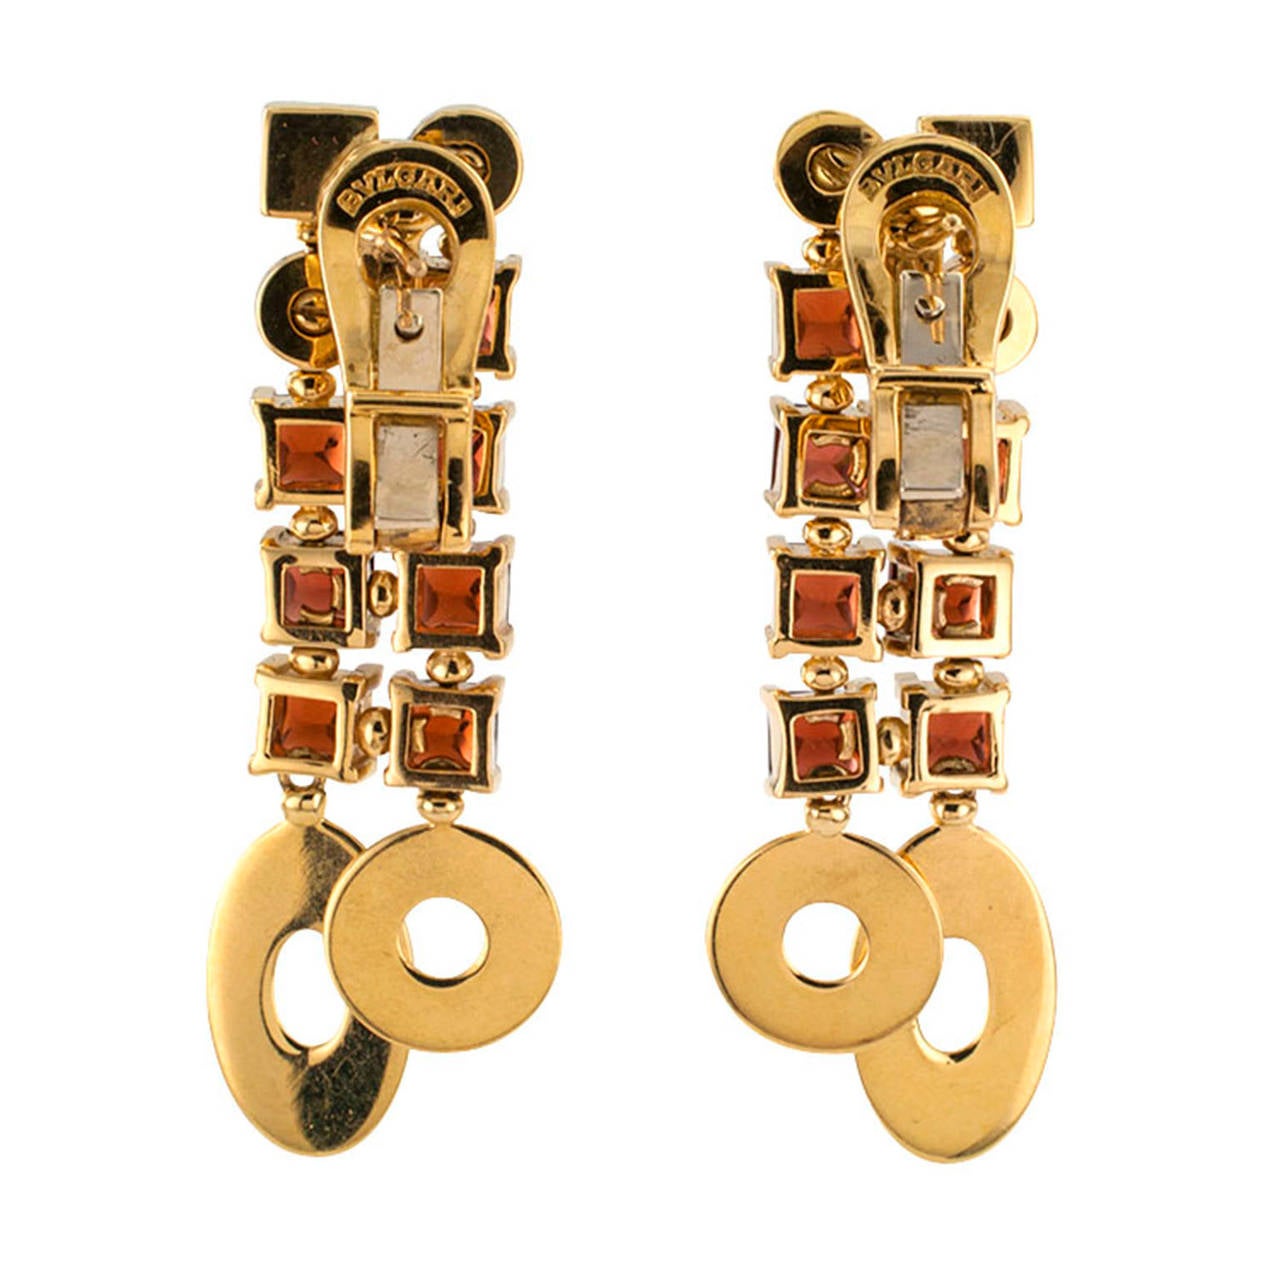 Bvlgari  Garnet And Diamond Pendant Earrings

These really look like fun under the sun or under the moon, smart and chic.  The articulated designs are set with square-cut garnet cabochons and round brilliant-cut diamonds, the latter totaling